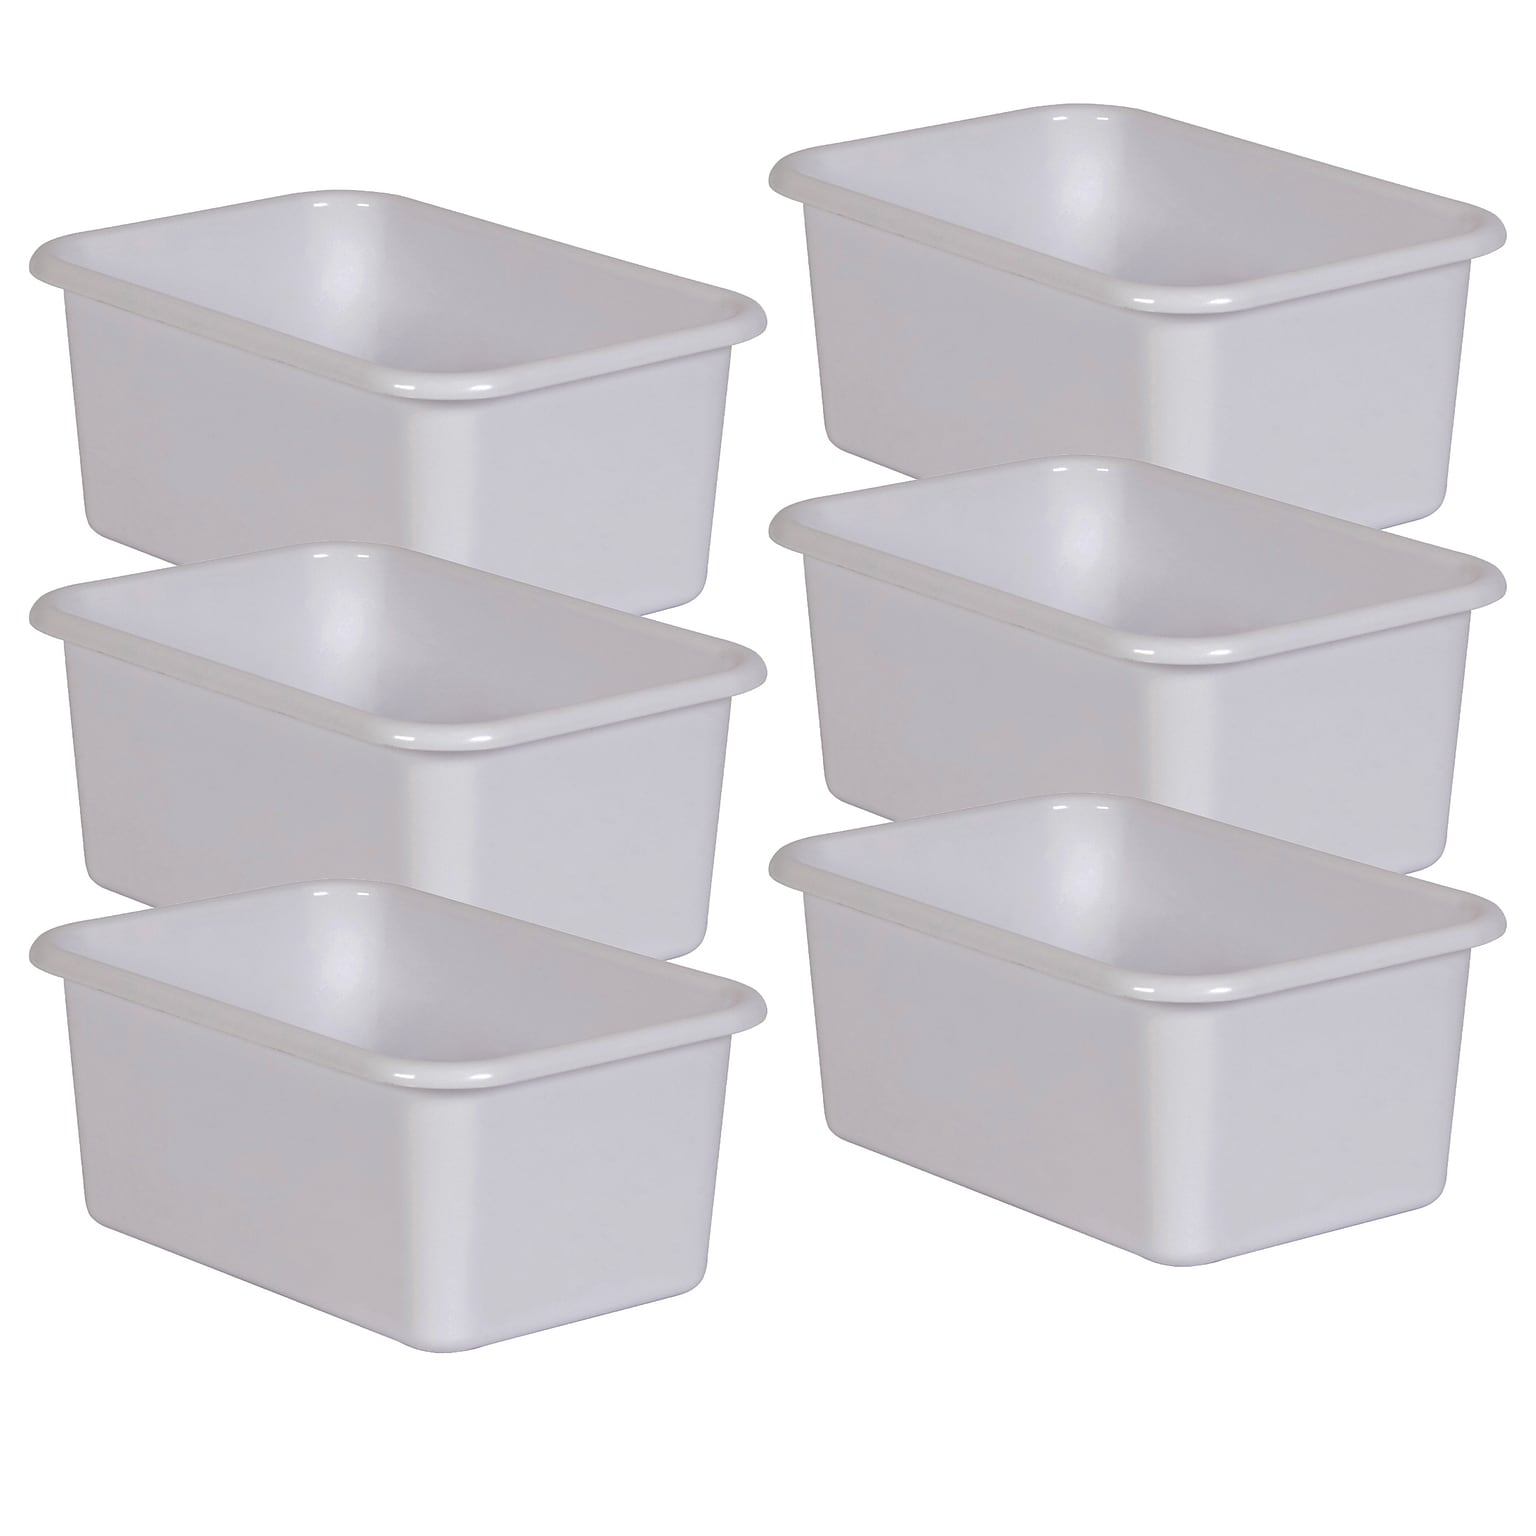 Teacher Created Resources® Plastic Storage Bin, Small, 7.75 x 11.38 x 5 , White, Pack of 6 (TCR20399-6)